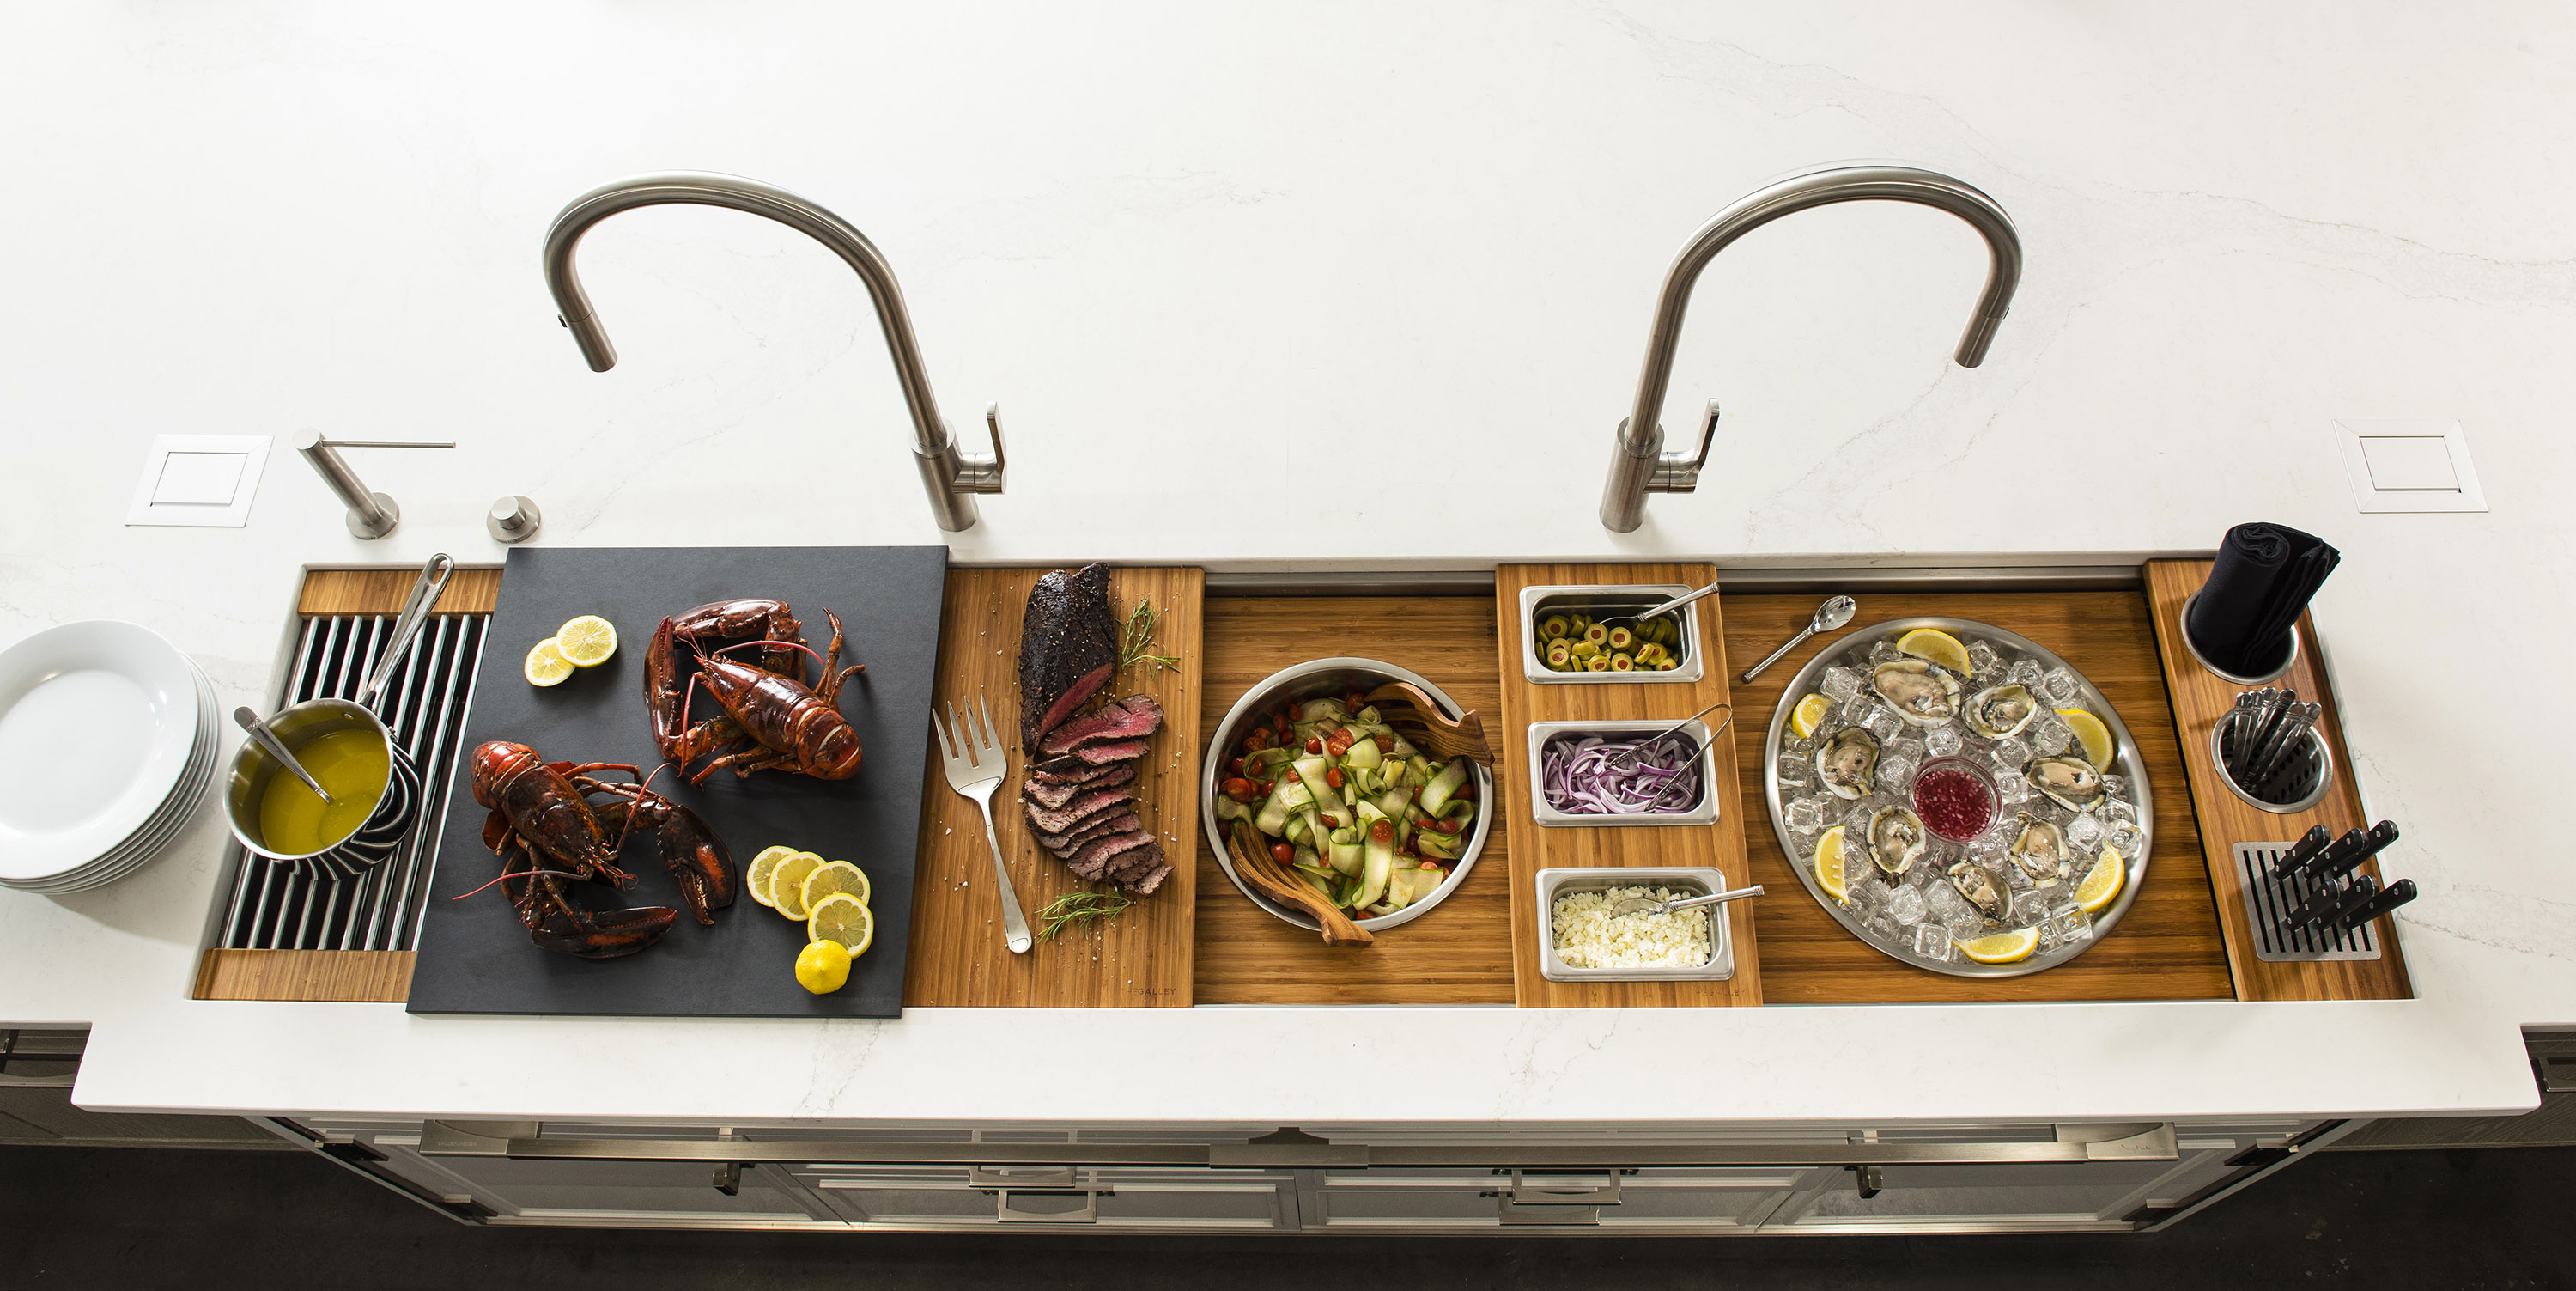 A thoughtful collection of sliding inserts allows you to customize your Galley Workstation to best suit your lifestyle.